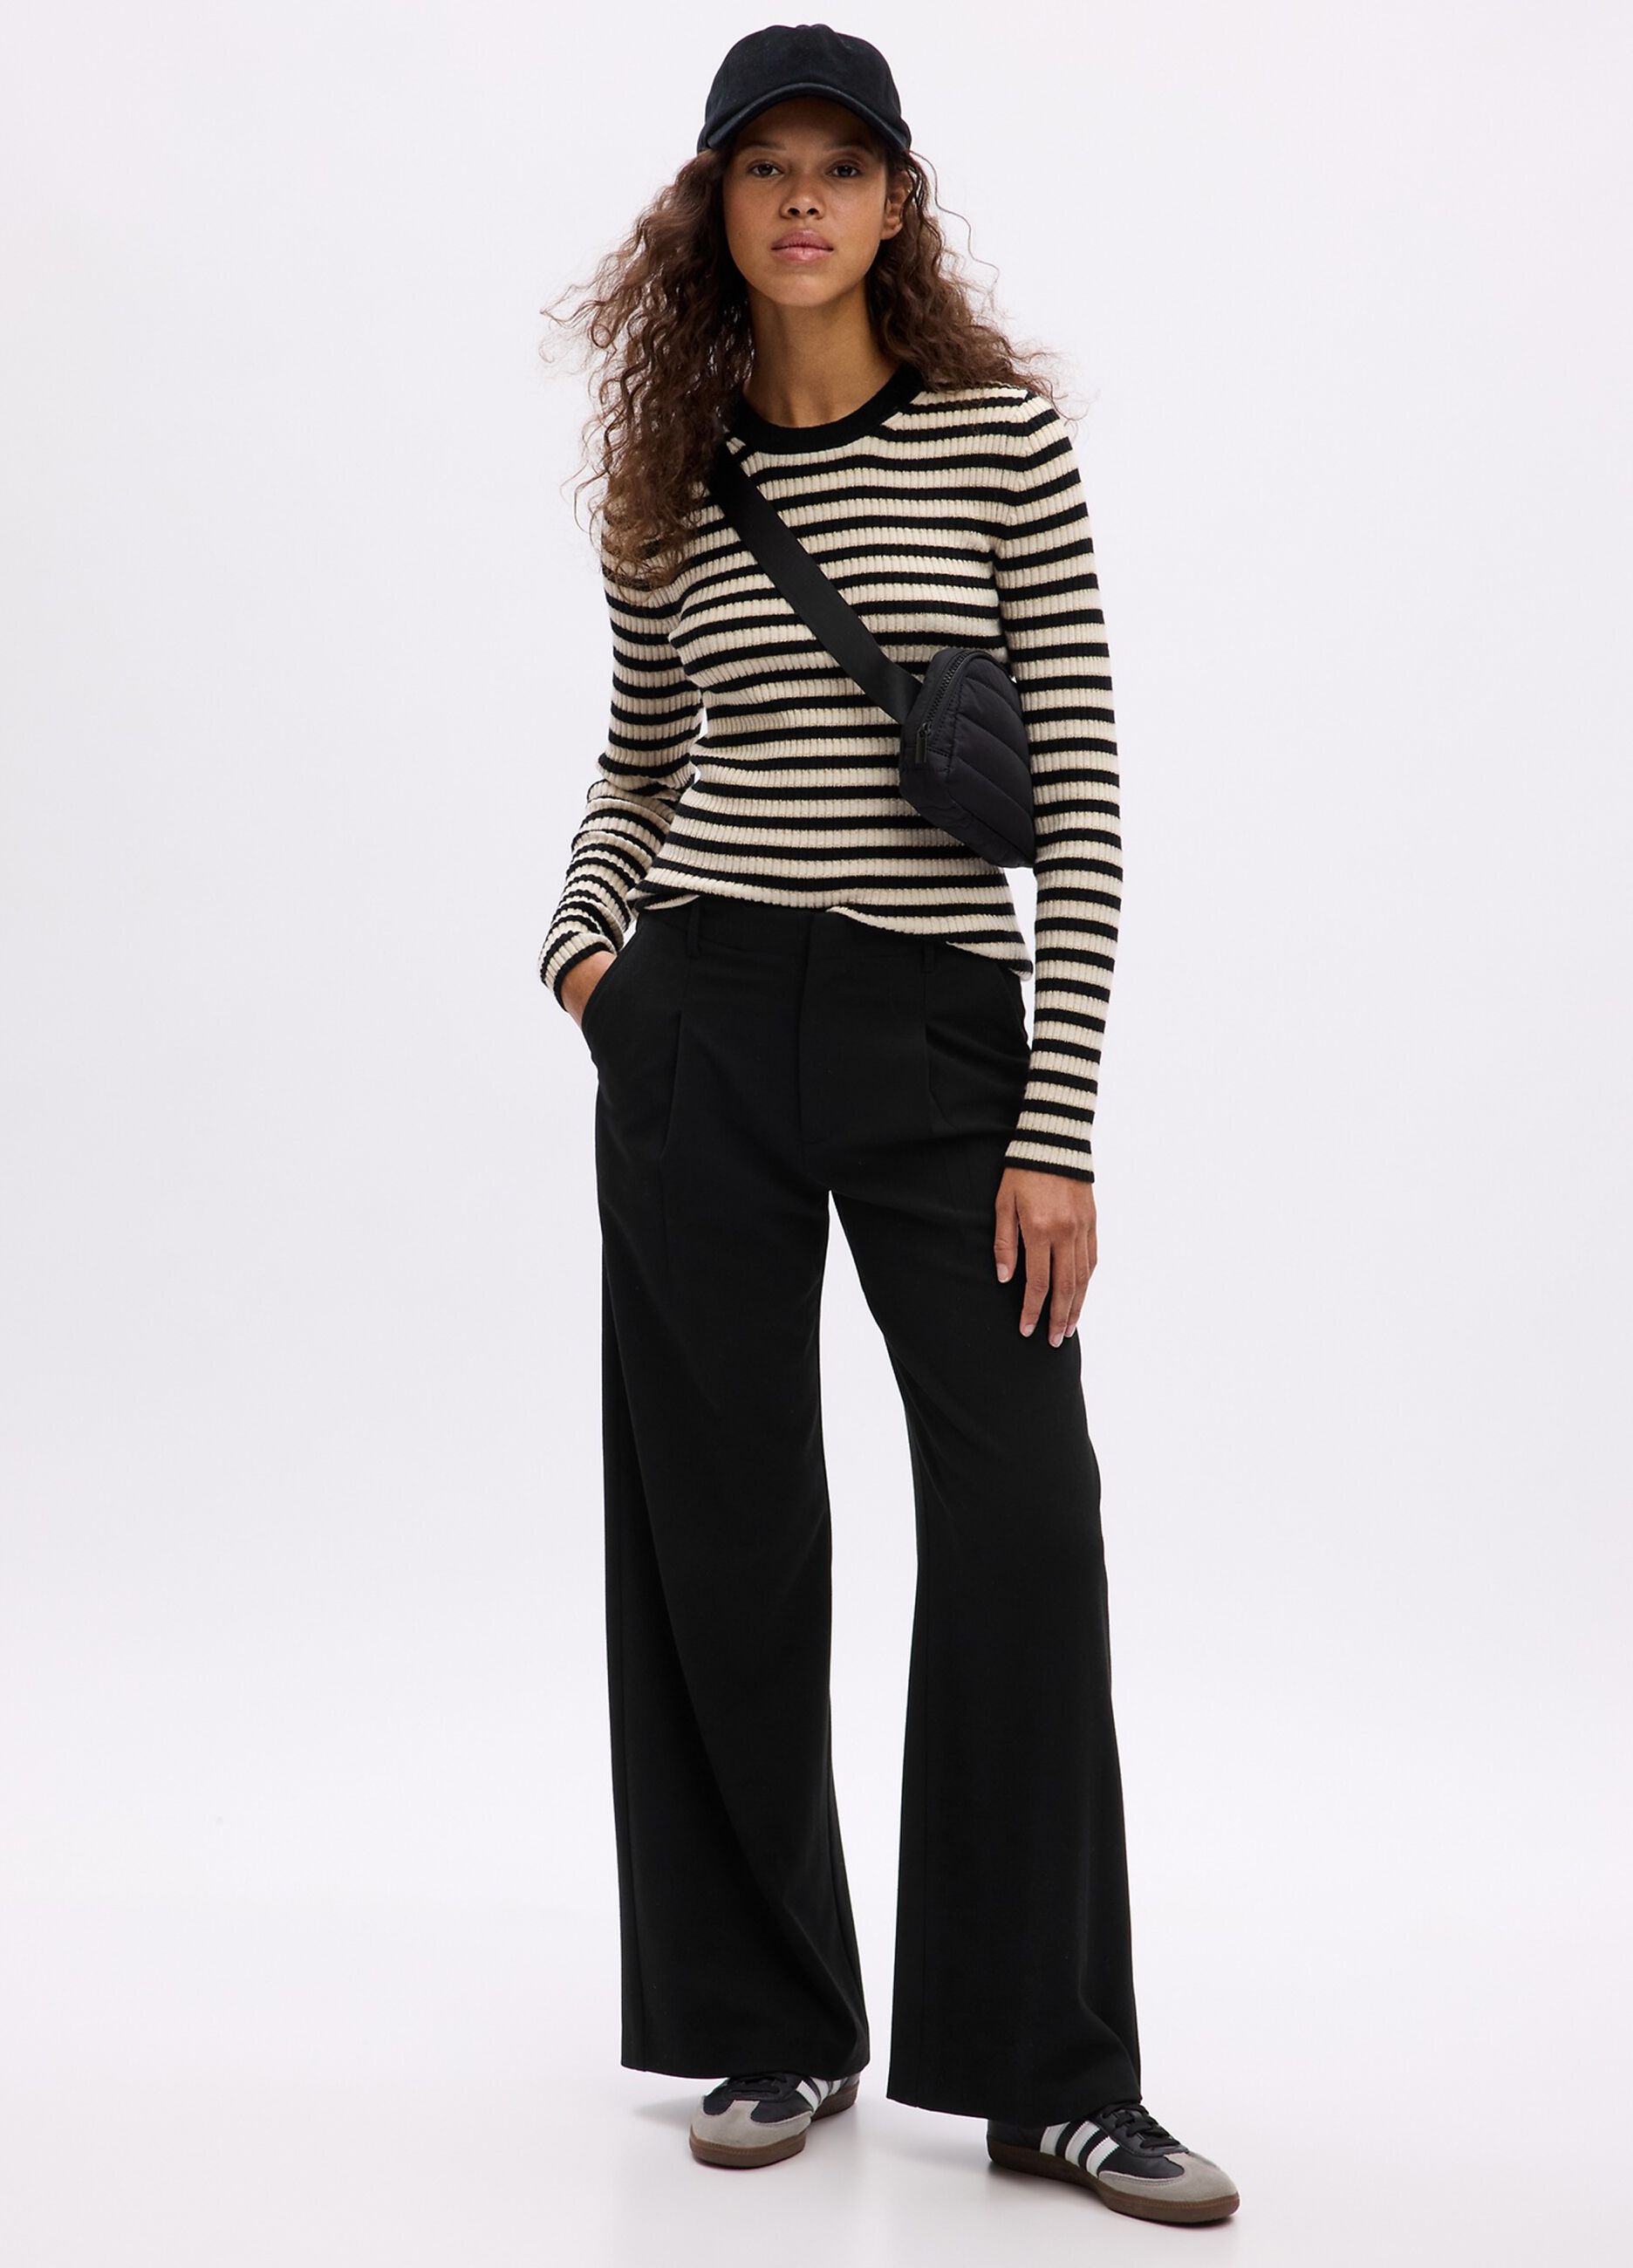 Ribbed top with striped pattern